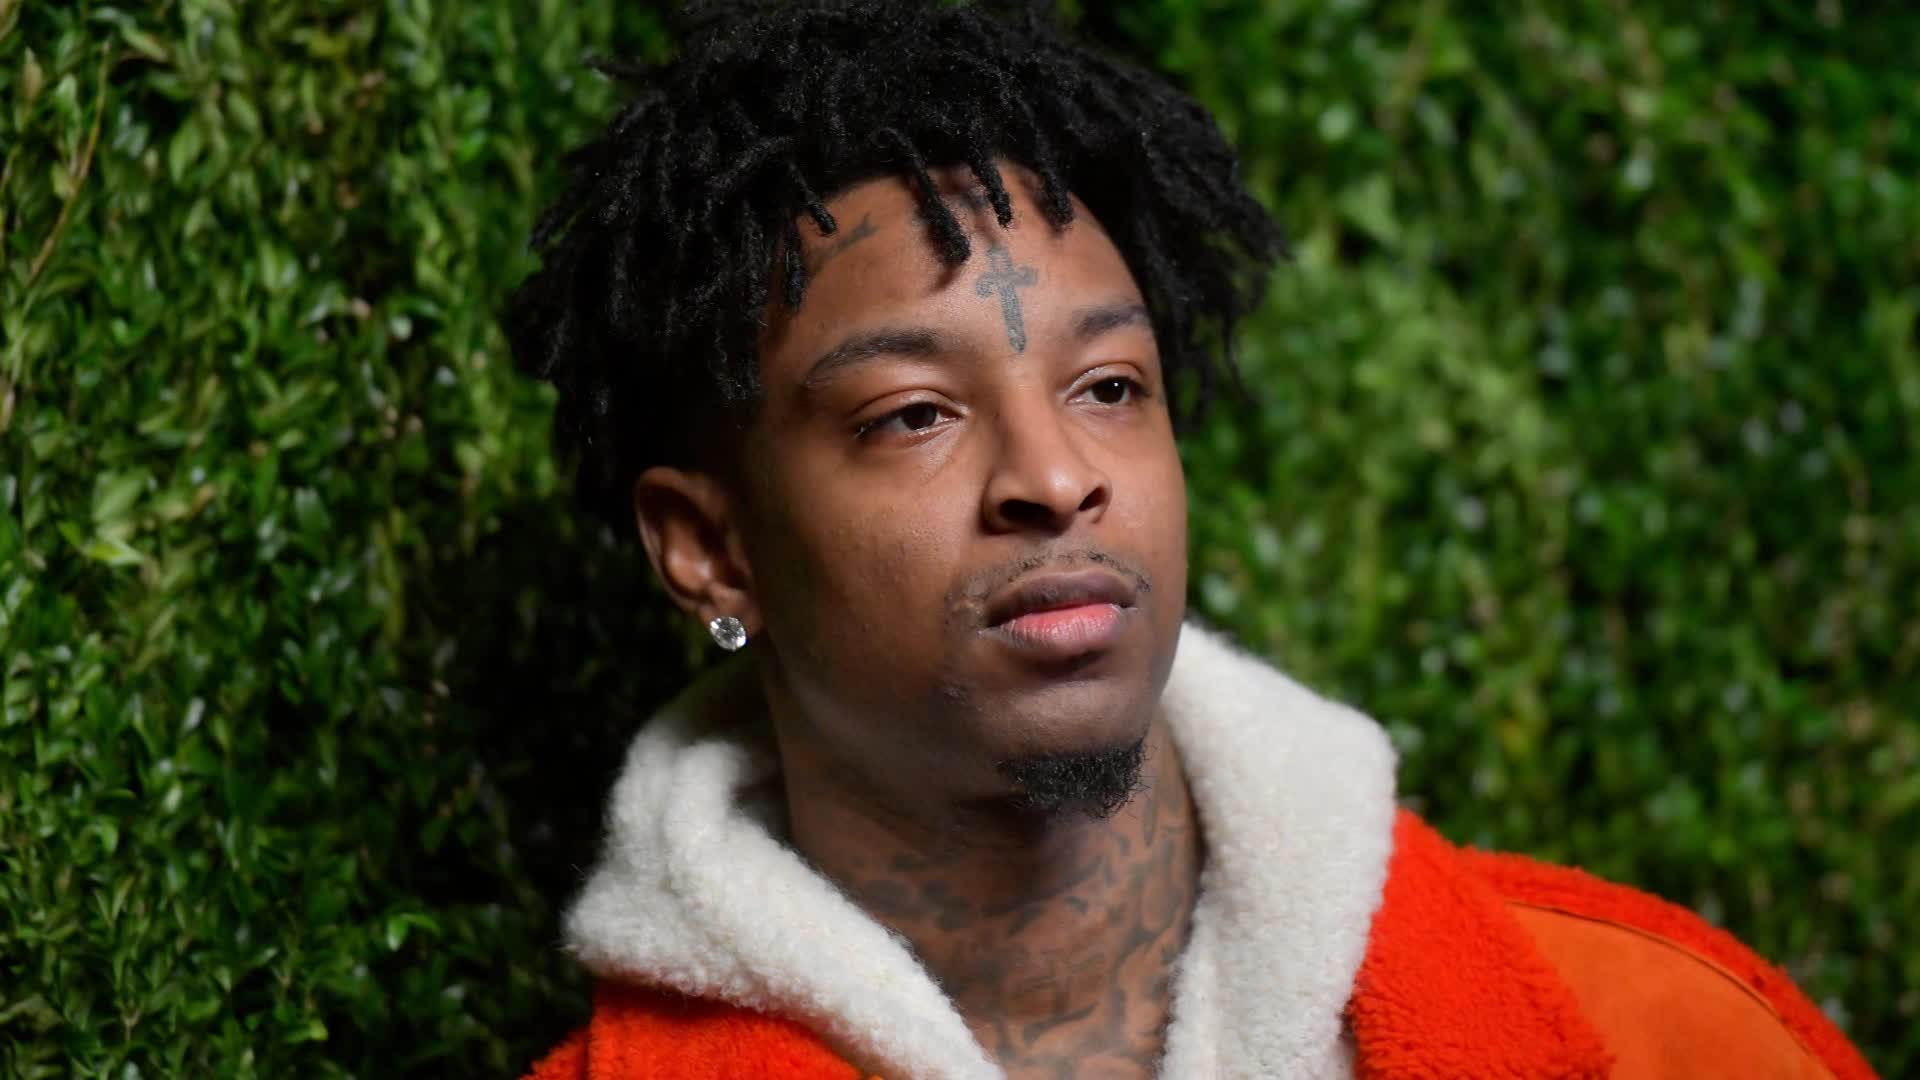 Rapper 21 Savage donates $25,000 to help detained immigrants fight their  cases